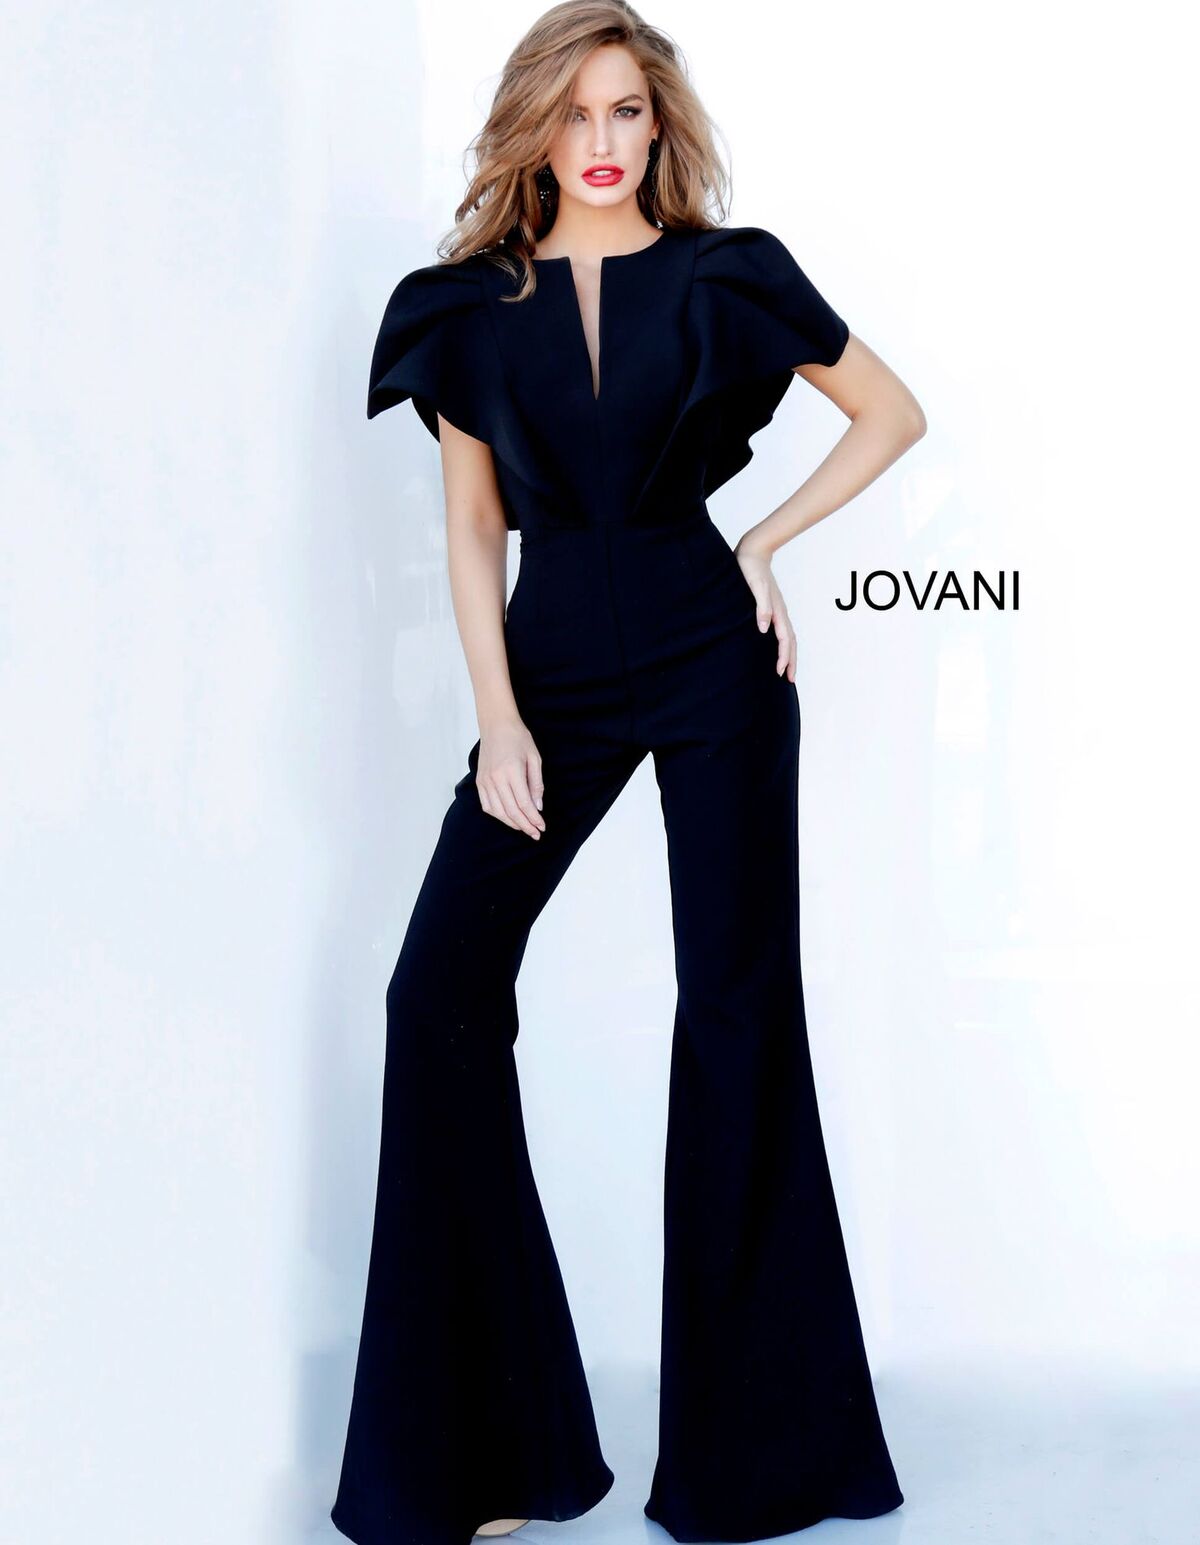 Jovani 00762 ruffle sleeve top with v neckline bell bottoms jumpsuit ruffle top bell bottoms jumpsuit Pageant Skinny V Neck Suit Couture  Available colors:  Black, Fuchsia, Ivory, Navy, Red, Tangerine, Turquoise  Available sizes:  00-24 